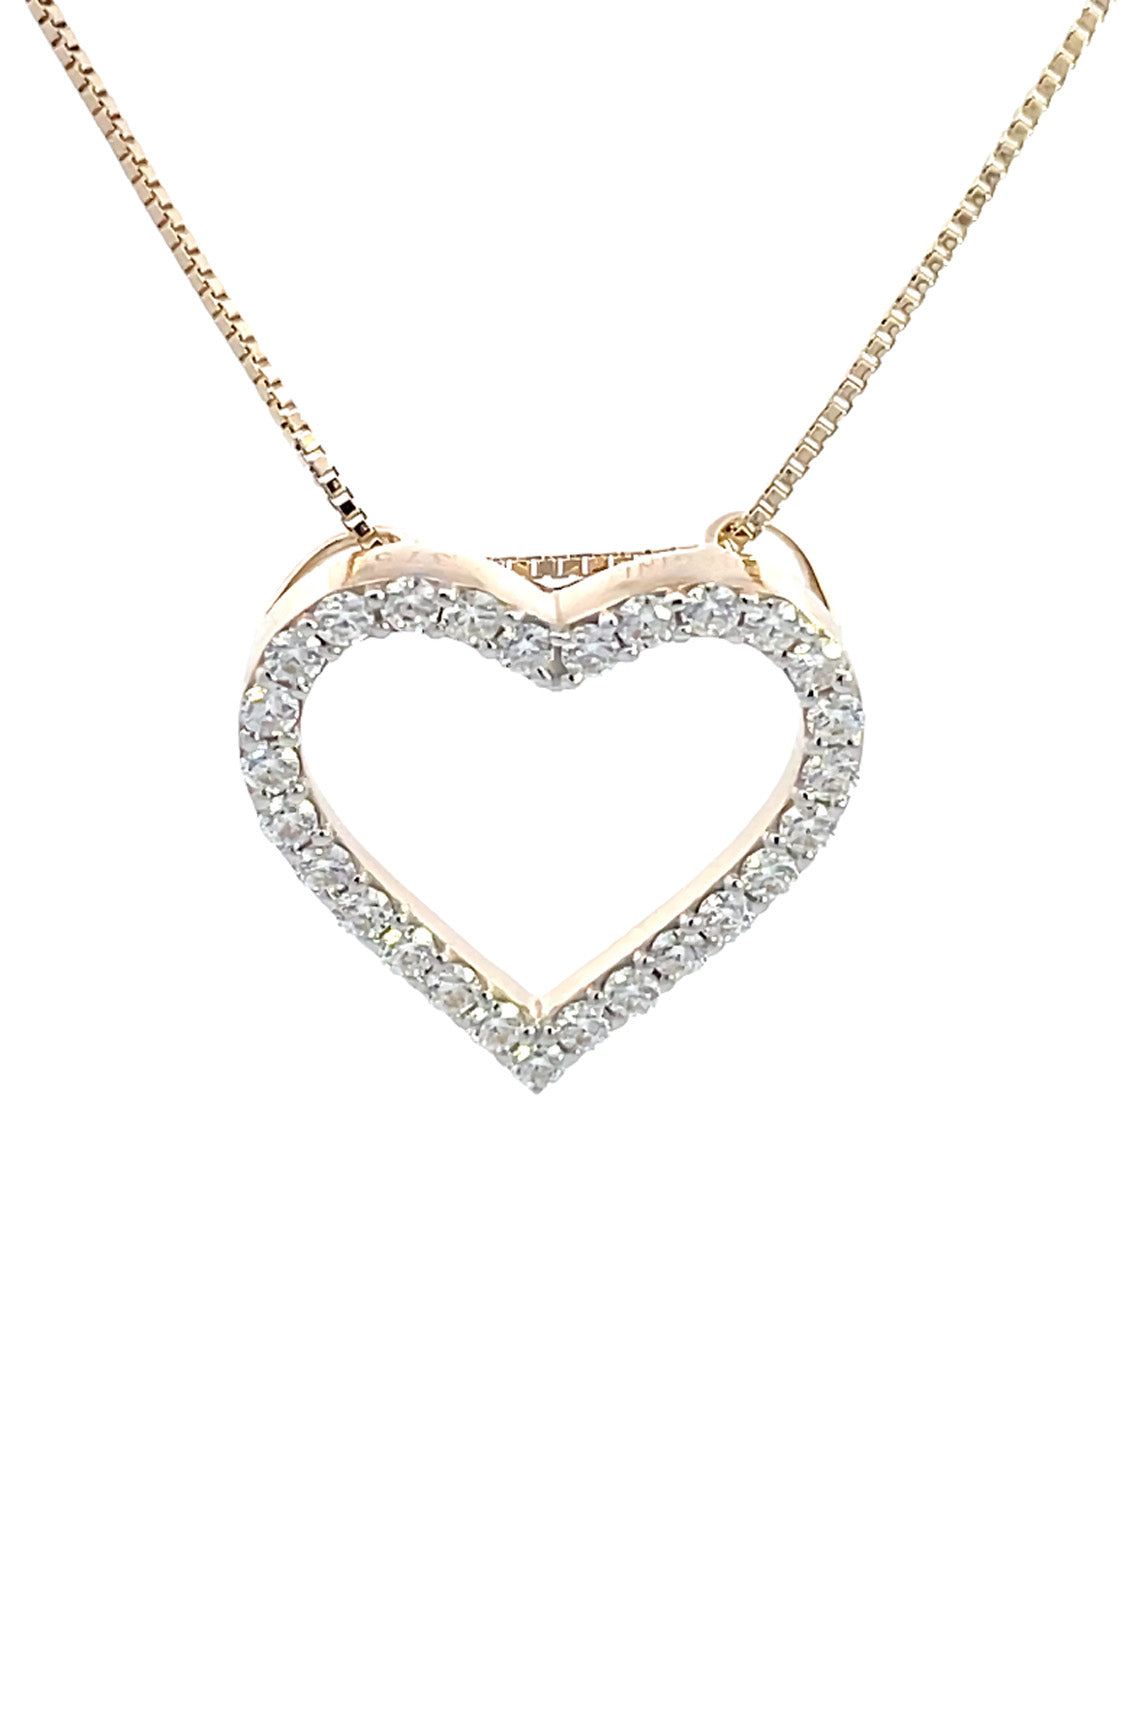 HEART 0.5TCW IN 9CT YELLOW GOLD PENDANT